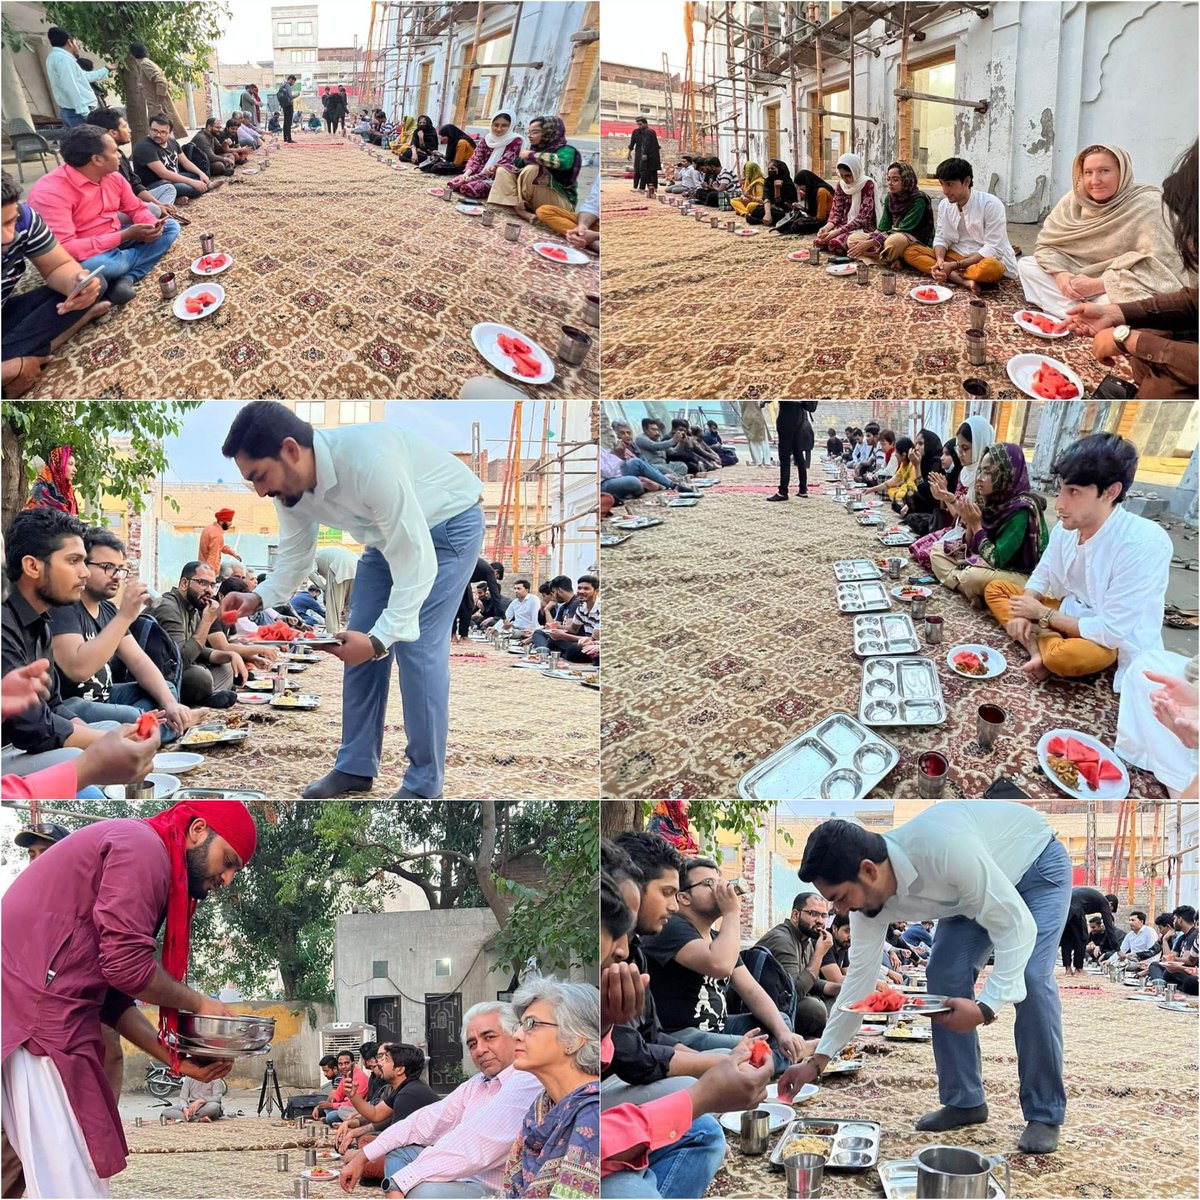 𝐈𝐟𝐭𝐚𝐫-𝐄-𝐀𝐦𝐚𝐧 event at 𝐎𝐥𝐝 𝐆𝐮𝐫𝐮𝐝𝐰𝐚𝐫𝐚 to host Muslim brethren to break their fast in Gurudwara. Individuals from Hindu, Christian and Sikh faiths hosted the Iftar-E-Aman event for  Muslim community.
#Saday_e_Aman #VoiceOfPeace #PeaceBuildingInitiative